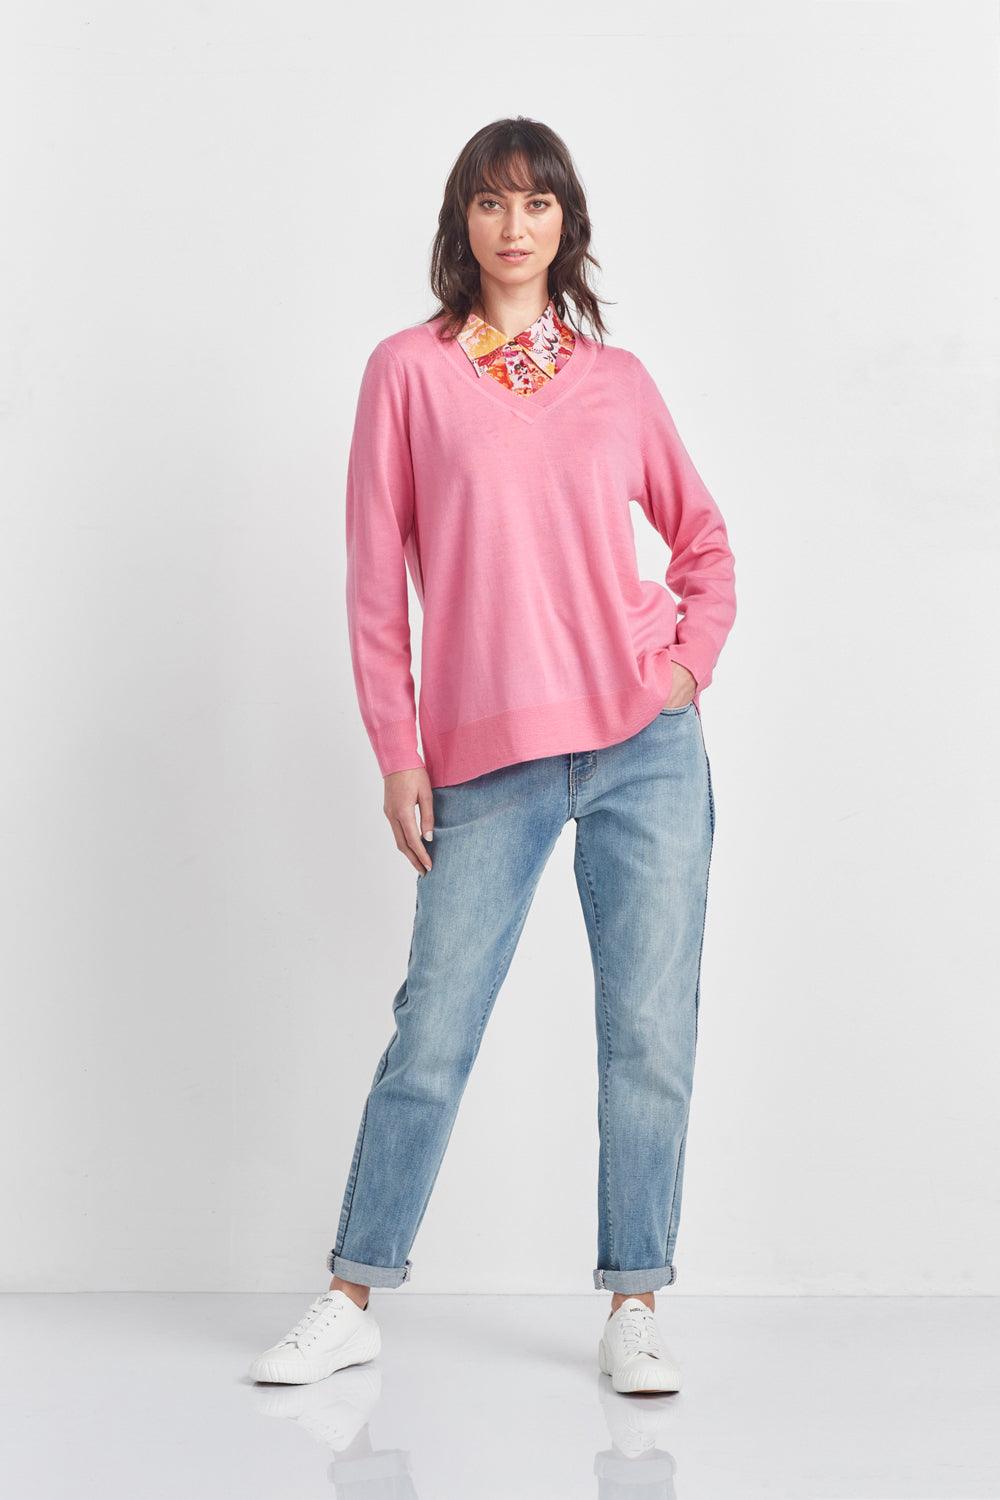 Network Sweater - Pink Panther - Sweater VERGE